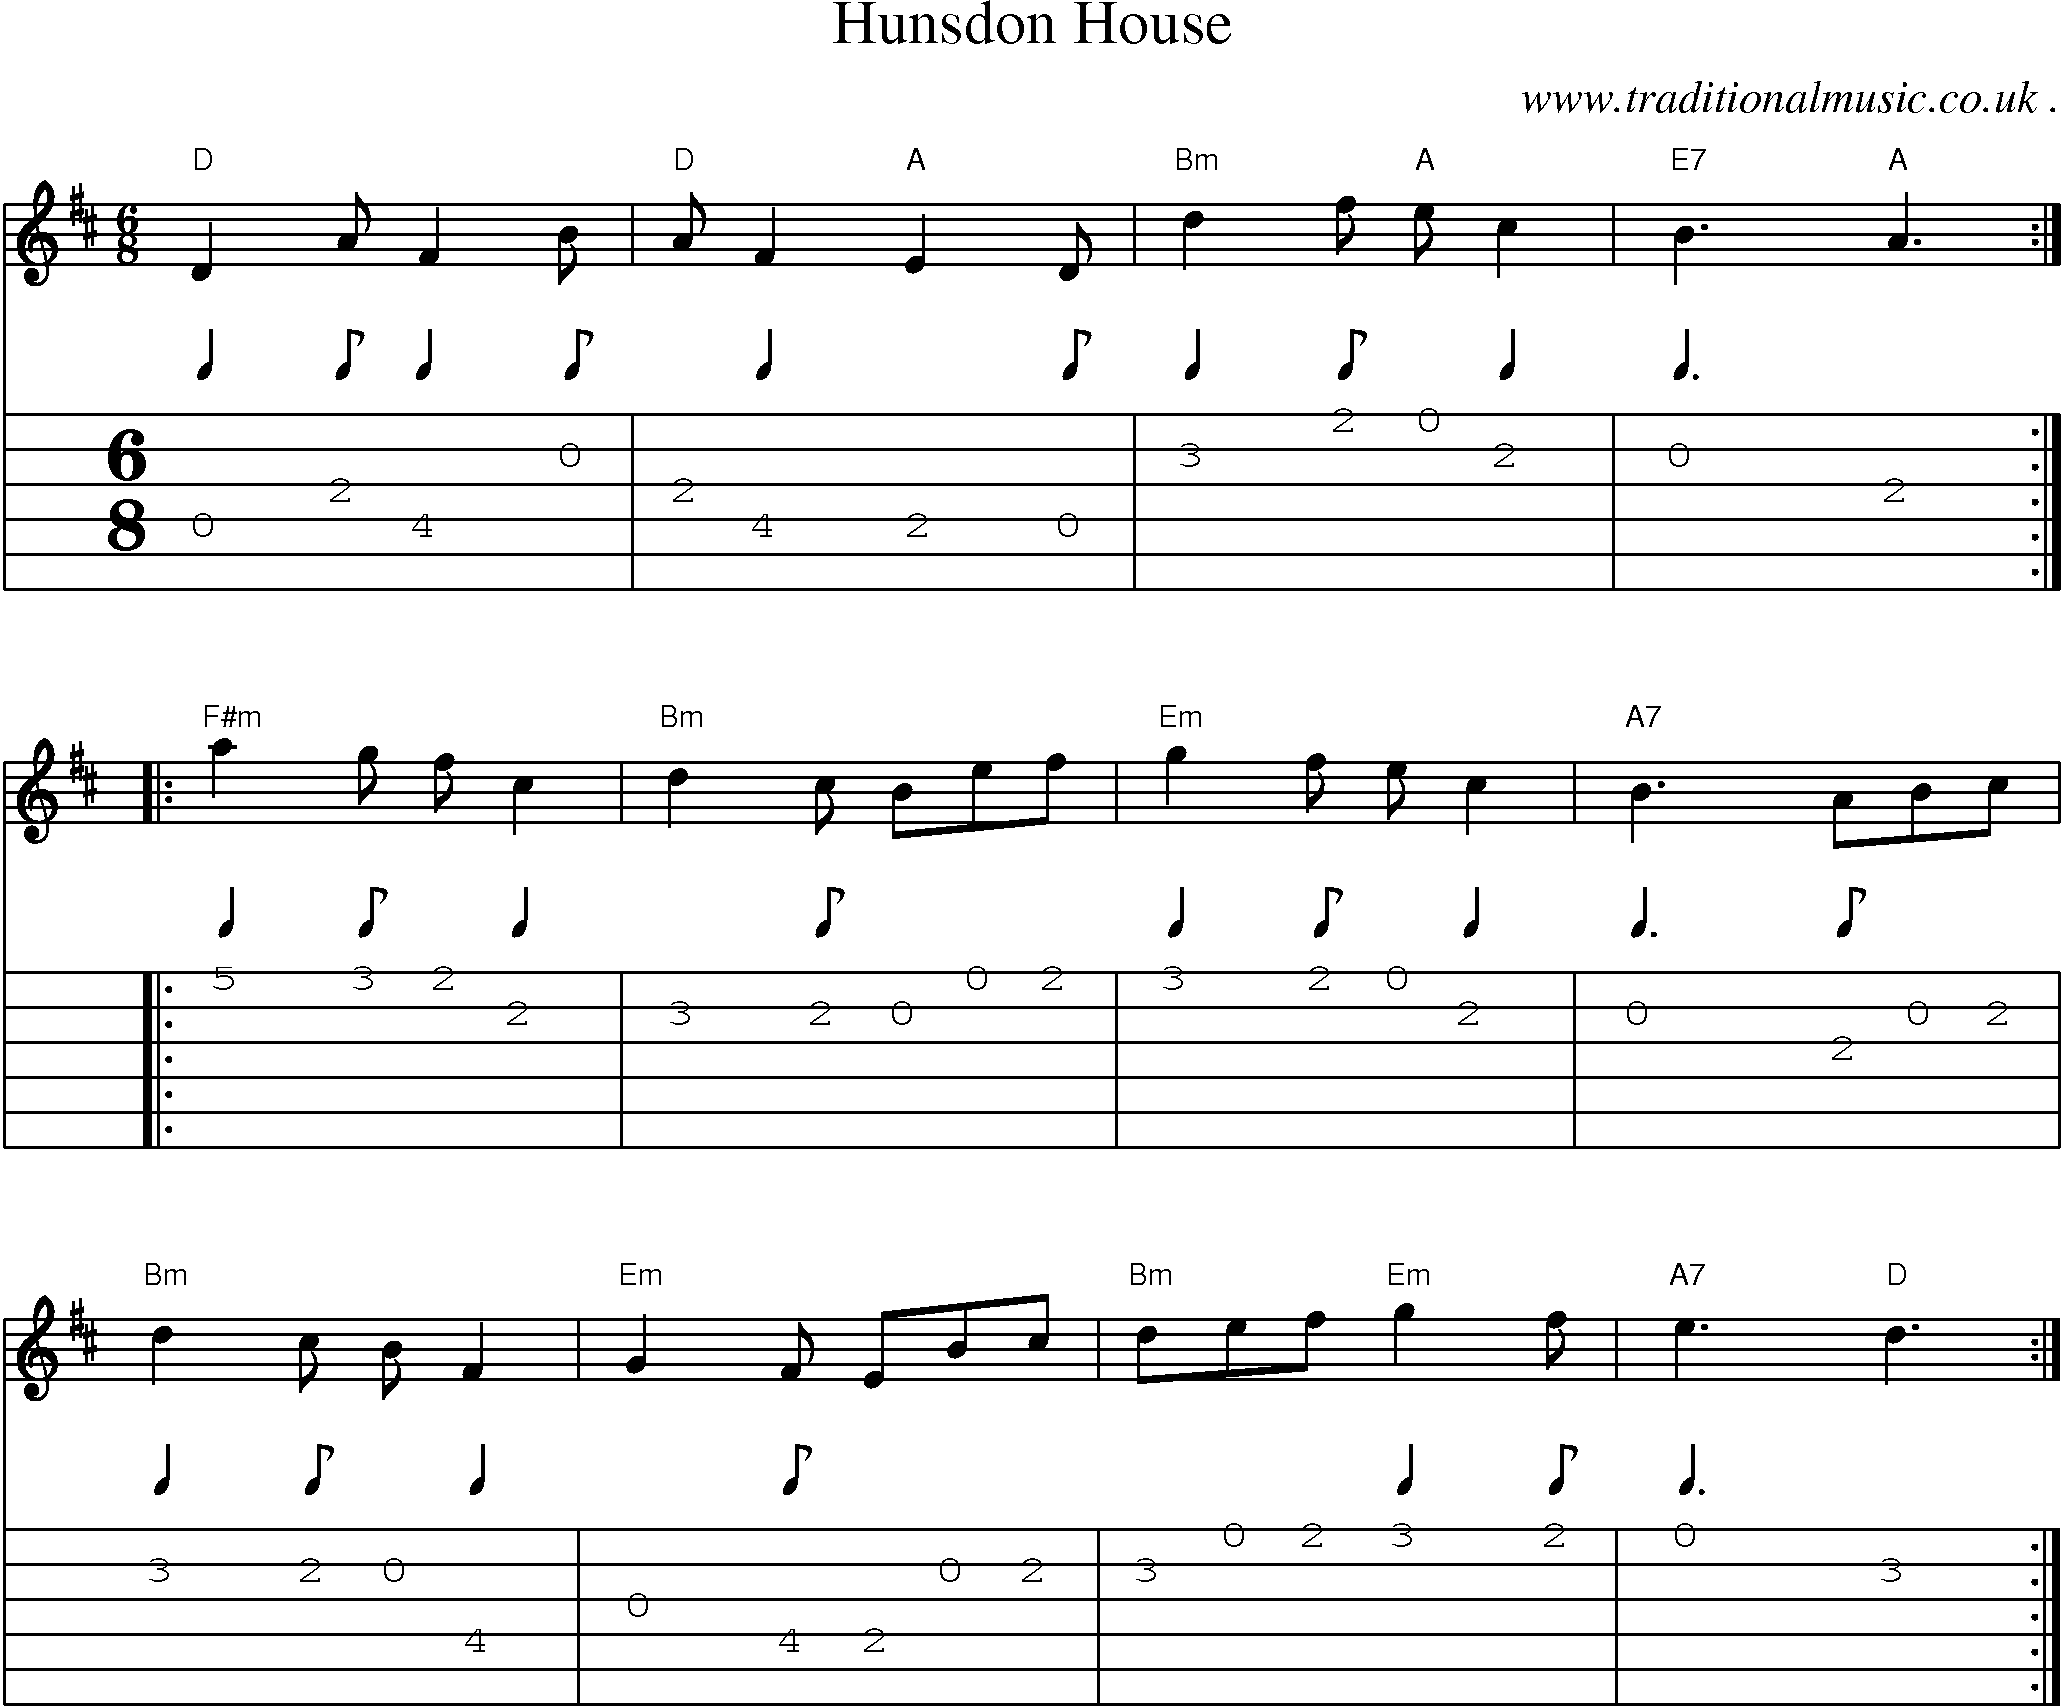 Music Score and Guitar Tabs for Hunsdon House